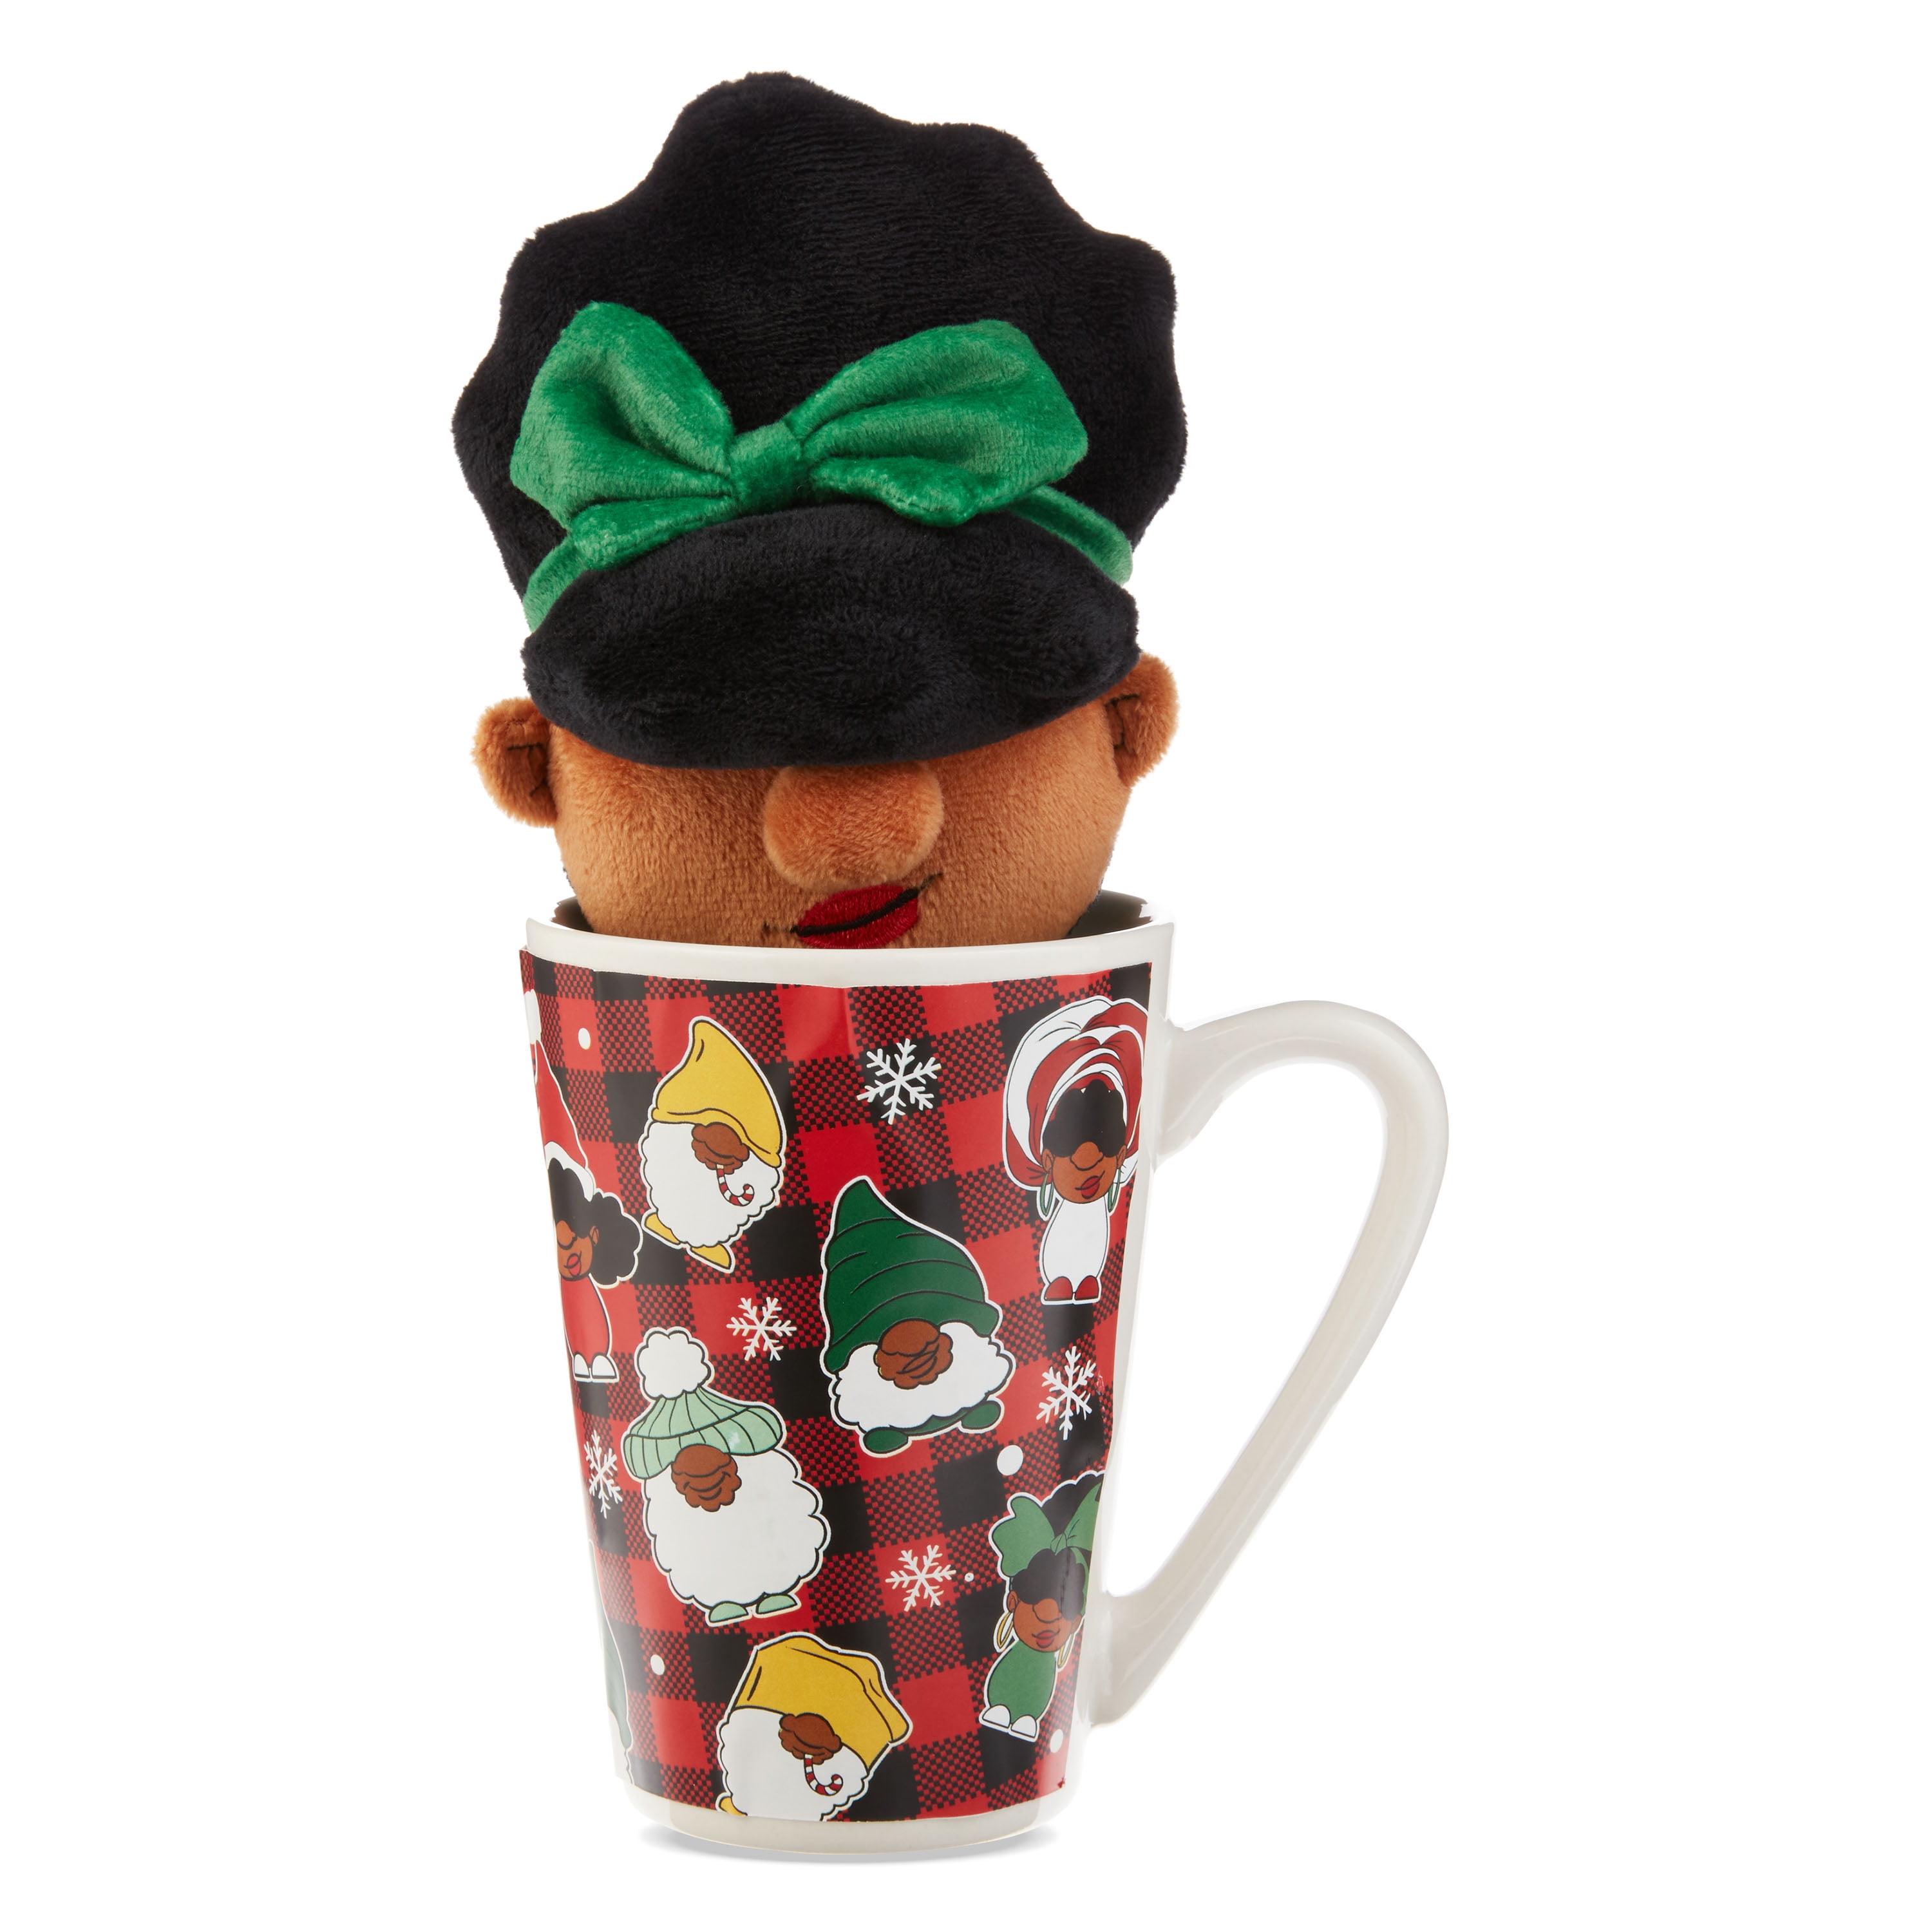 Black Paper Party Lady Gnome 7 inch Holiday Plush With A 15 Ounce Ceramic Latte Mug, Multi Color, Green